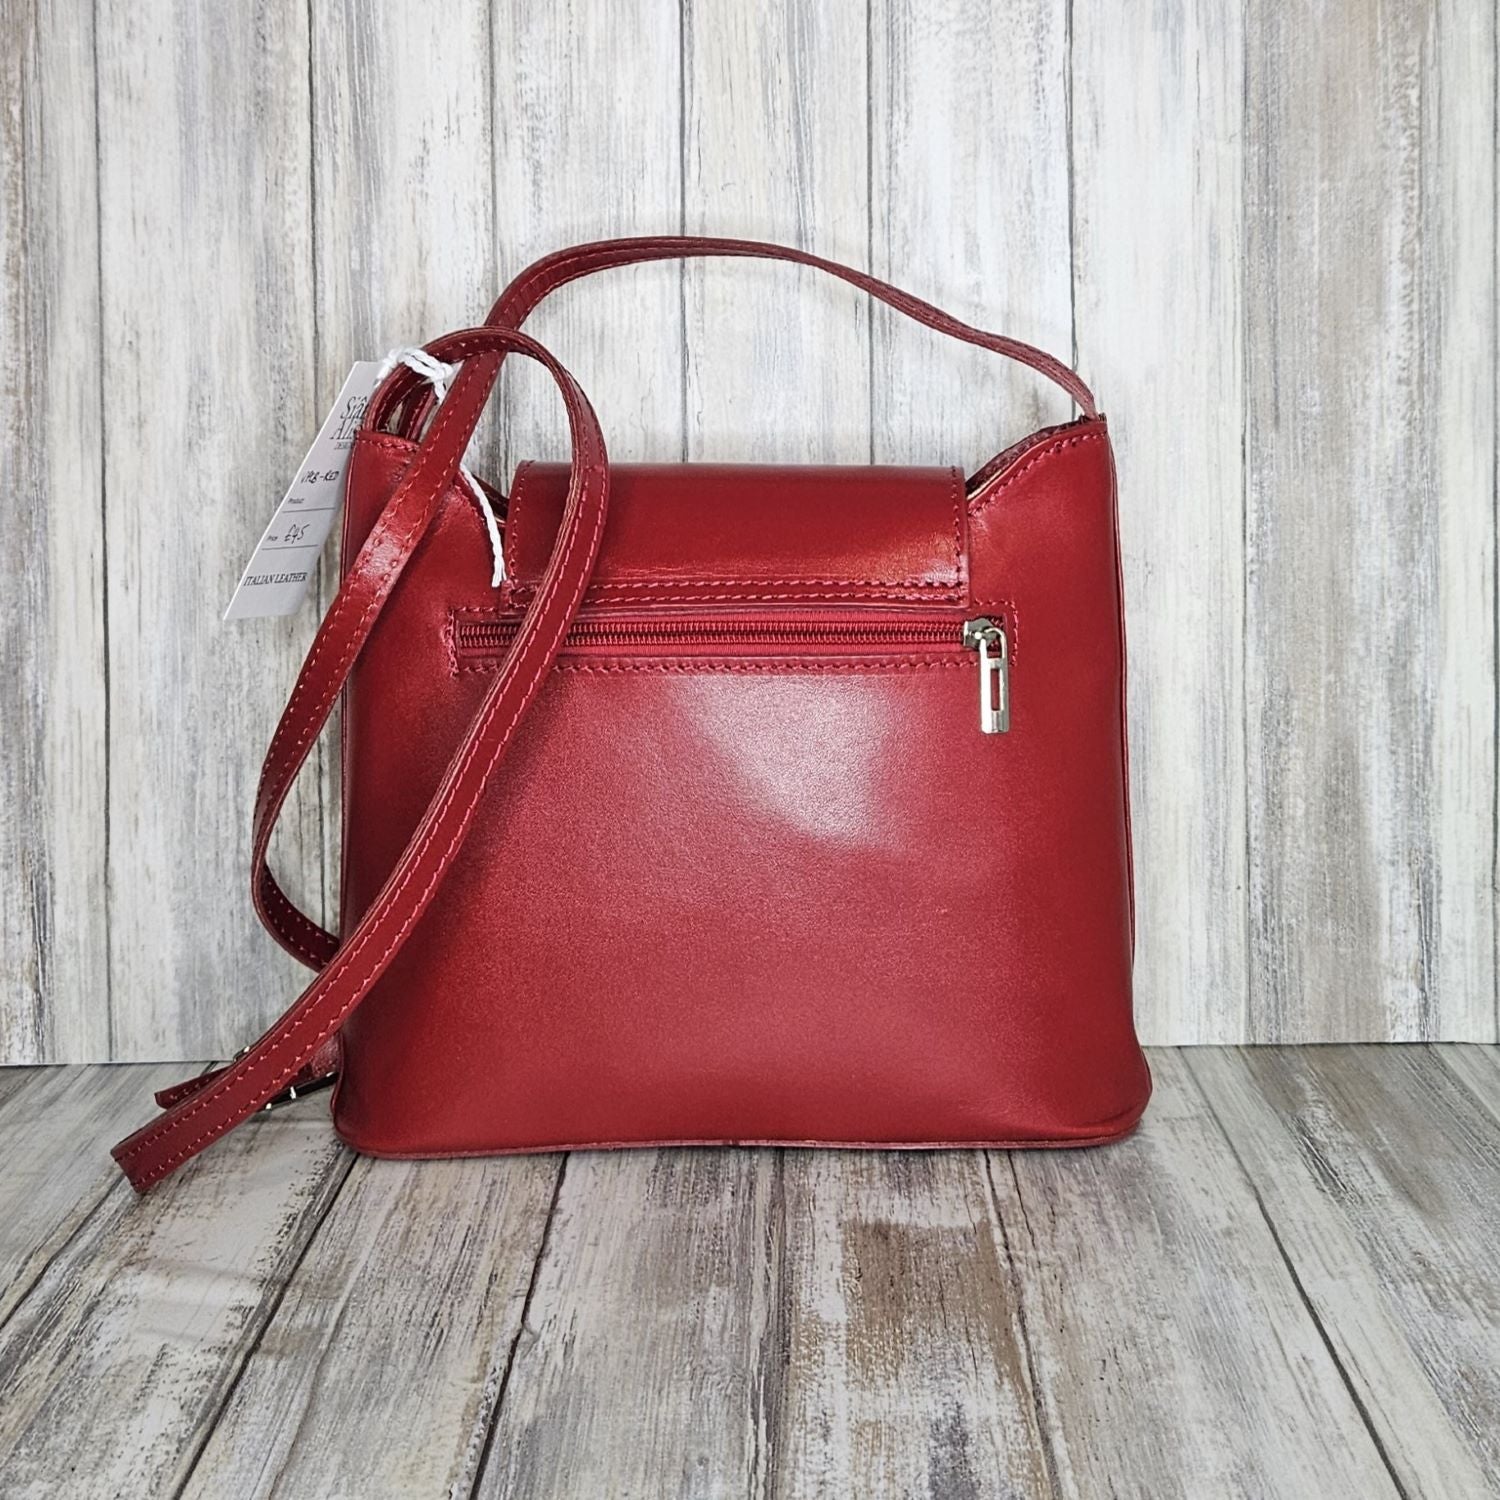 Crafted with Italian leather, this cross body bag features a magnetic dot and zip closure and an adjustable strap for a stylish look.       Back Zip Pocket   Internal Slip Pocket   Silver Hardware   H20cm x W24cm x D6cm